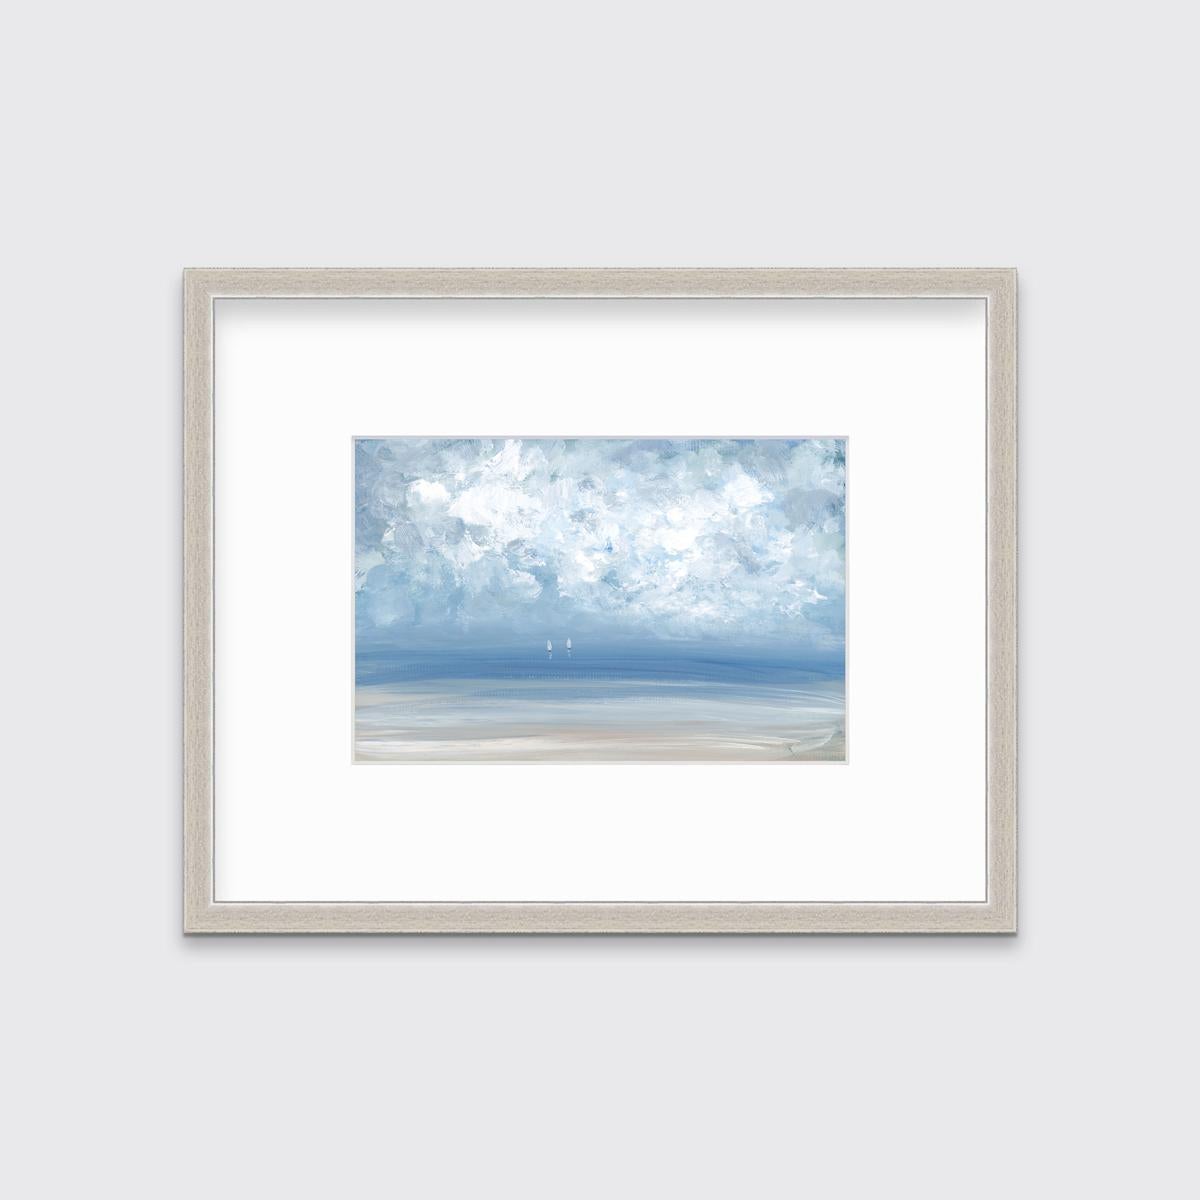 S. Cora Aldo Landscape Print - "High Clouds, " Framed Limited Edition Giclee Print, 16" x 24"